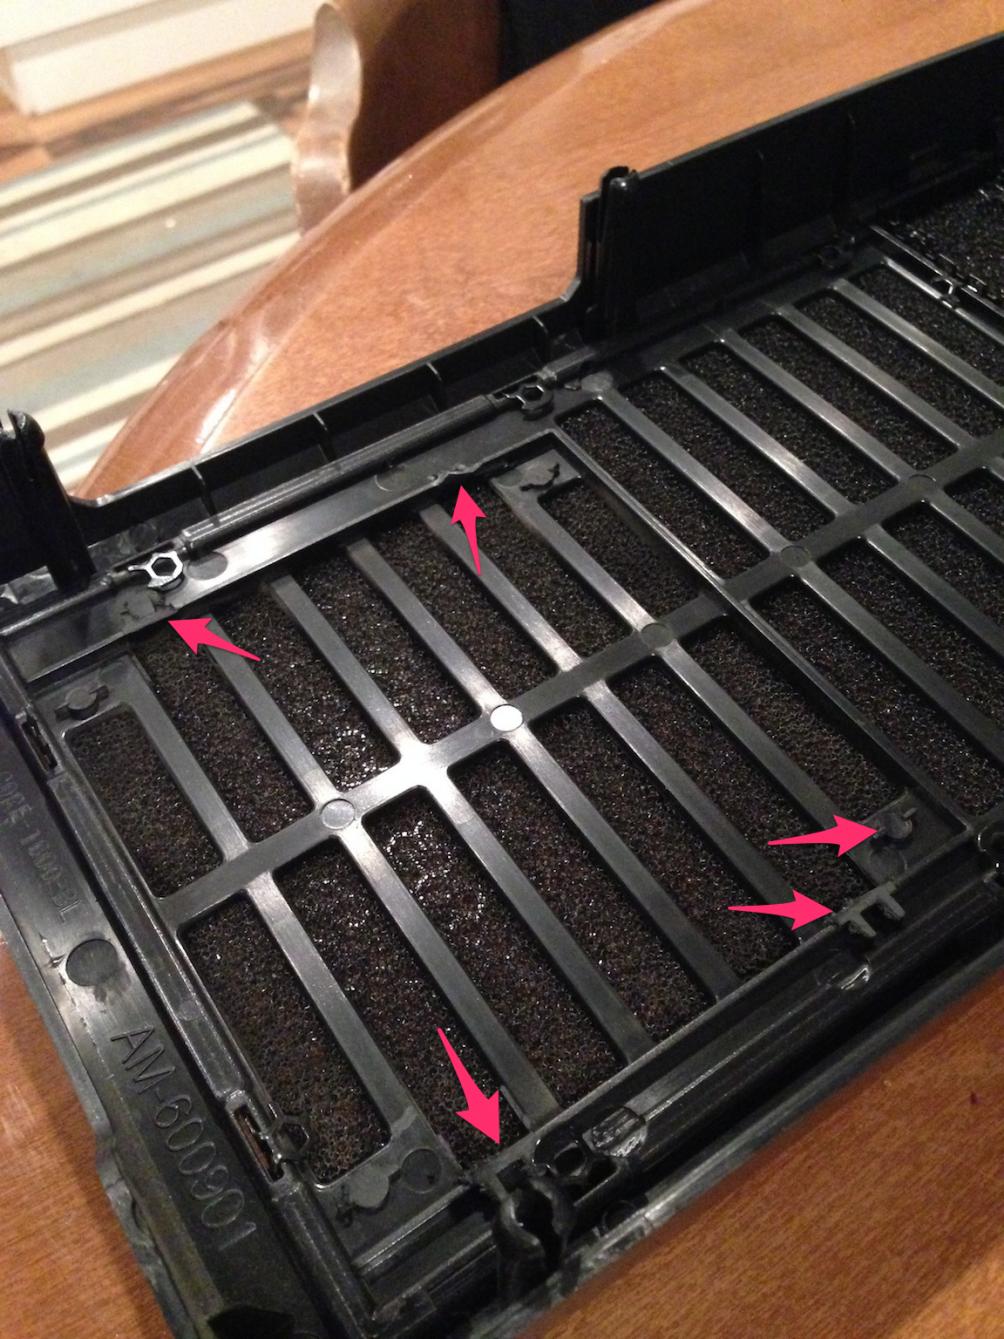 78773-had-use-my-dremel-cut-off-these-tabs-highlighted-arrows-fit-front-panel-case-back-after-installing-h60-cooler.jpg